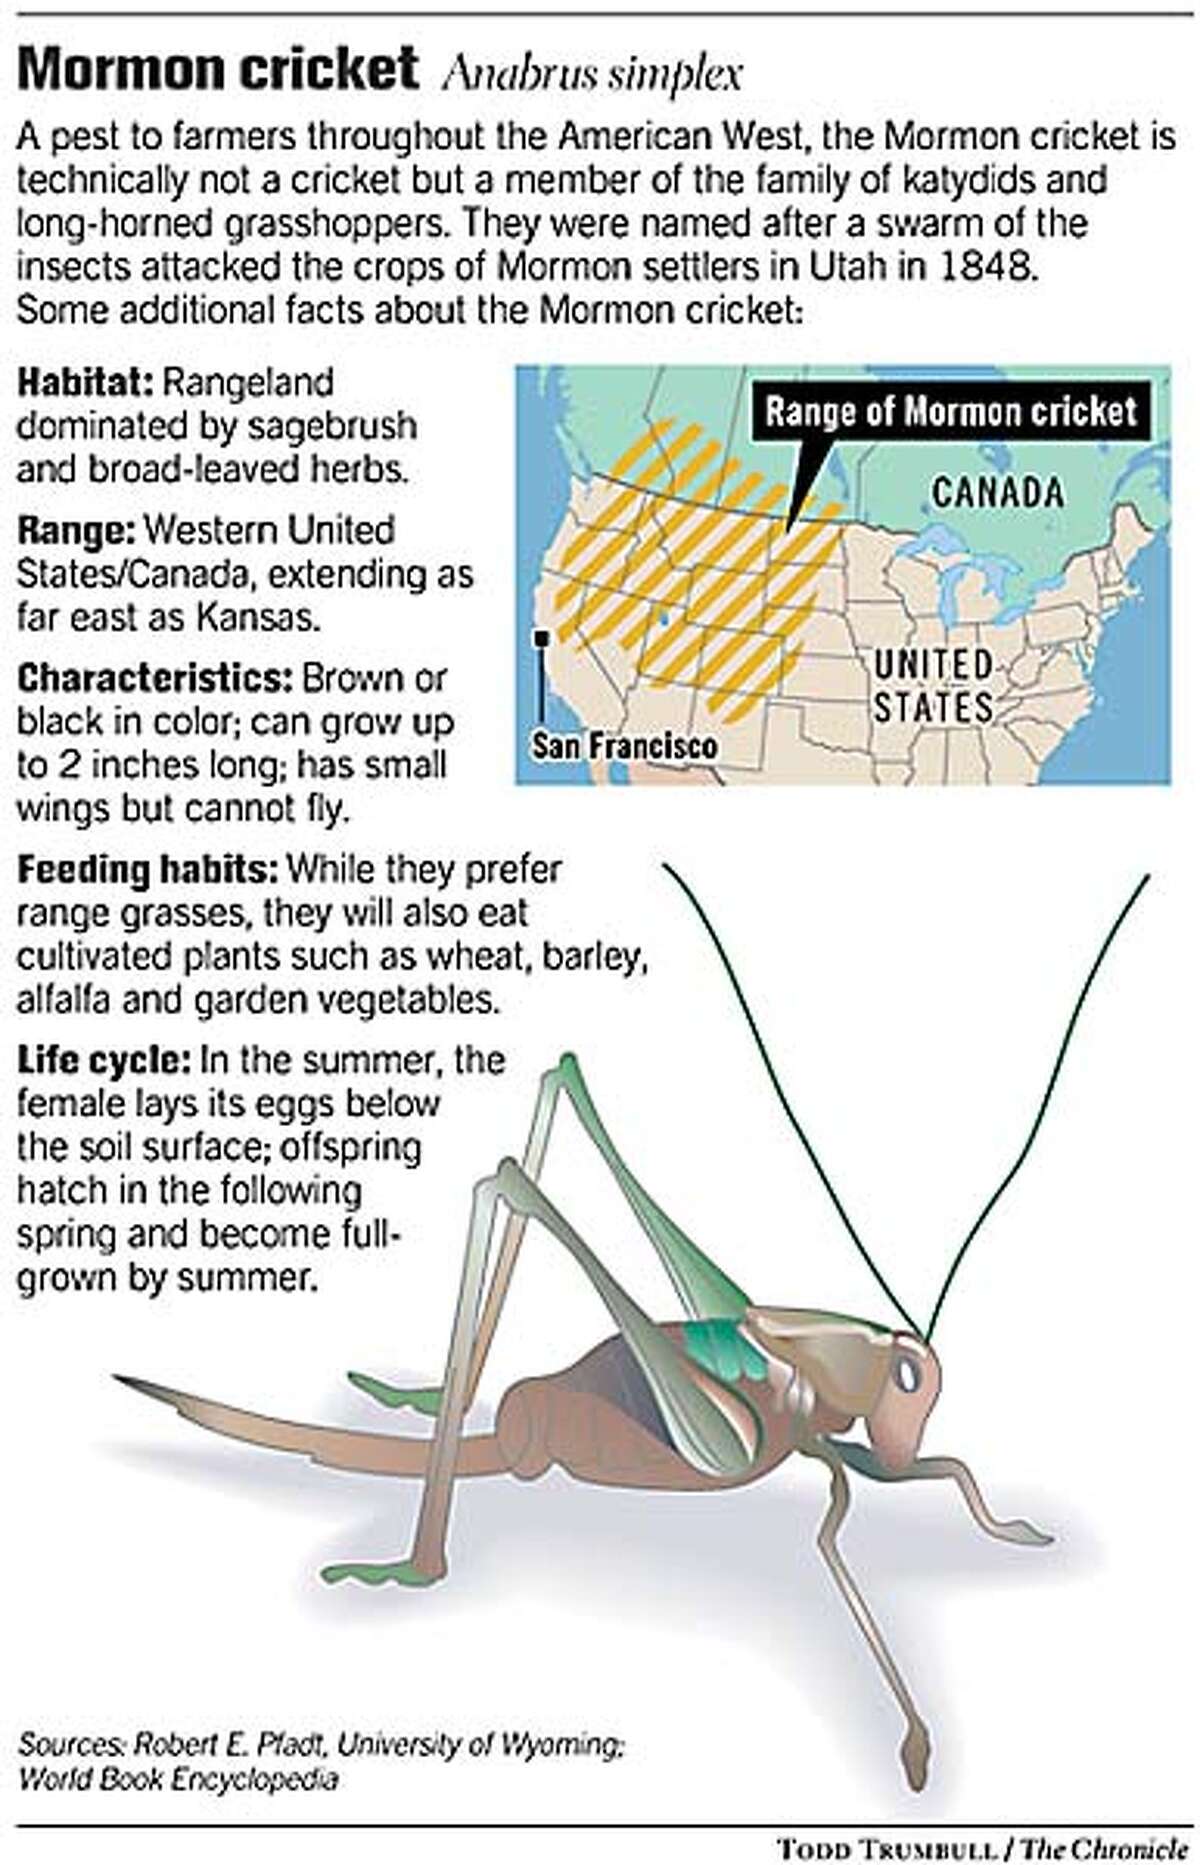 Plague of crickets besieges town / Elko, Nev., residents fight back